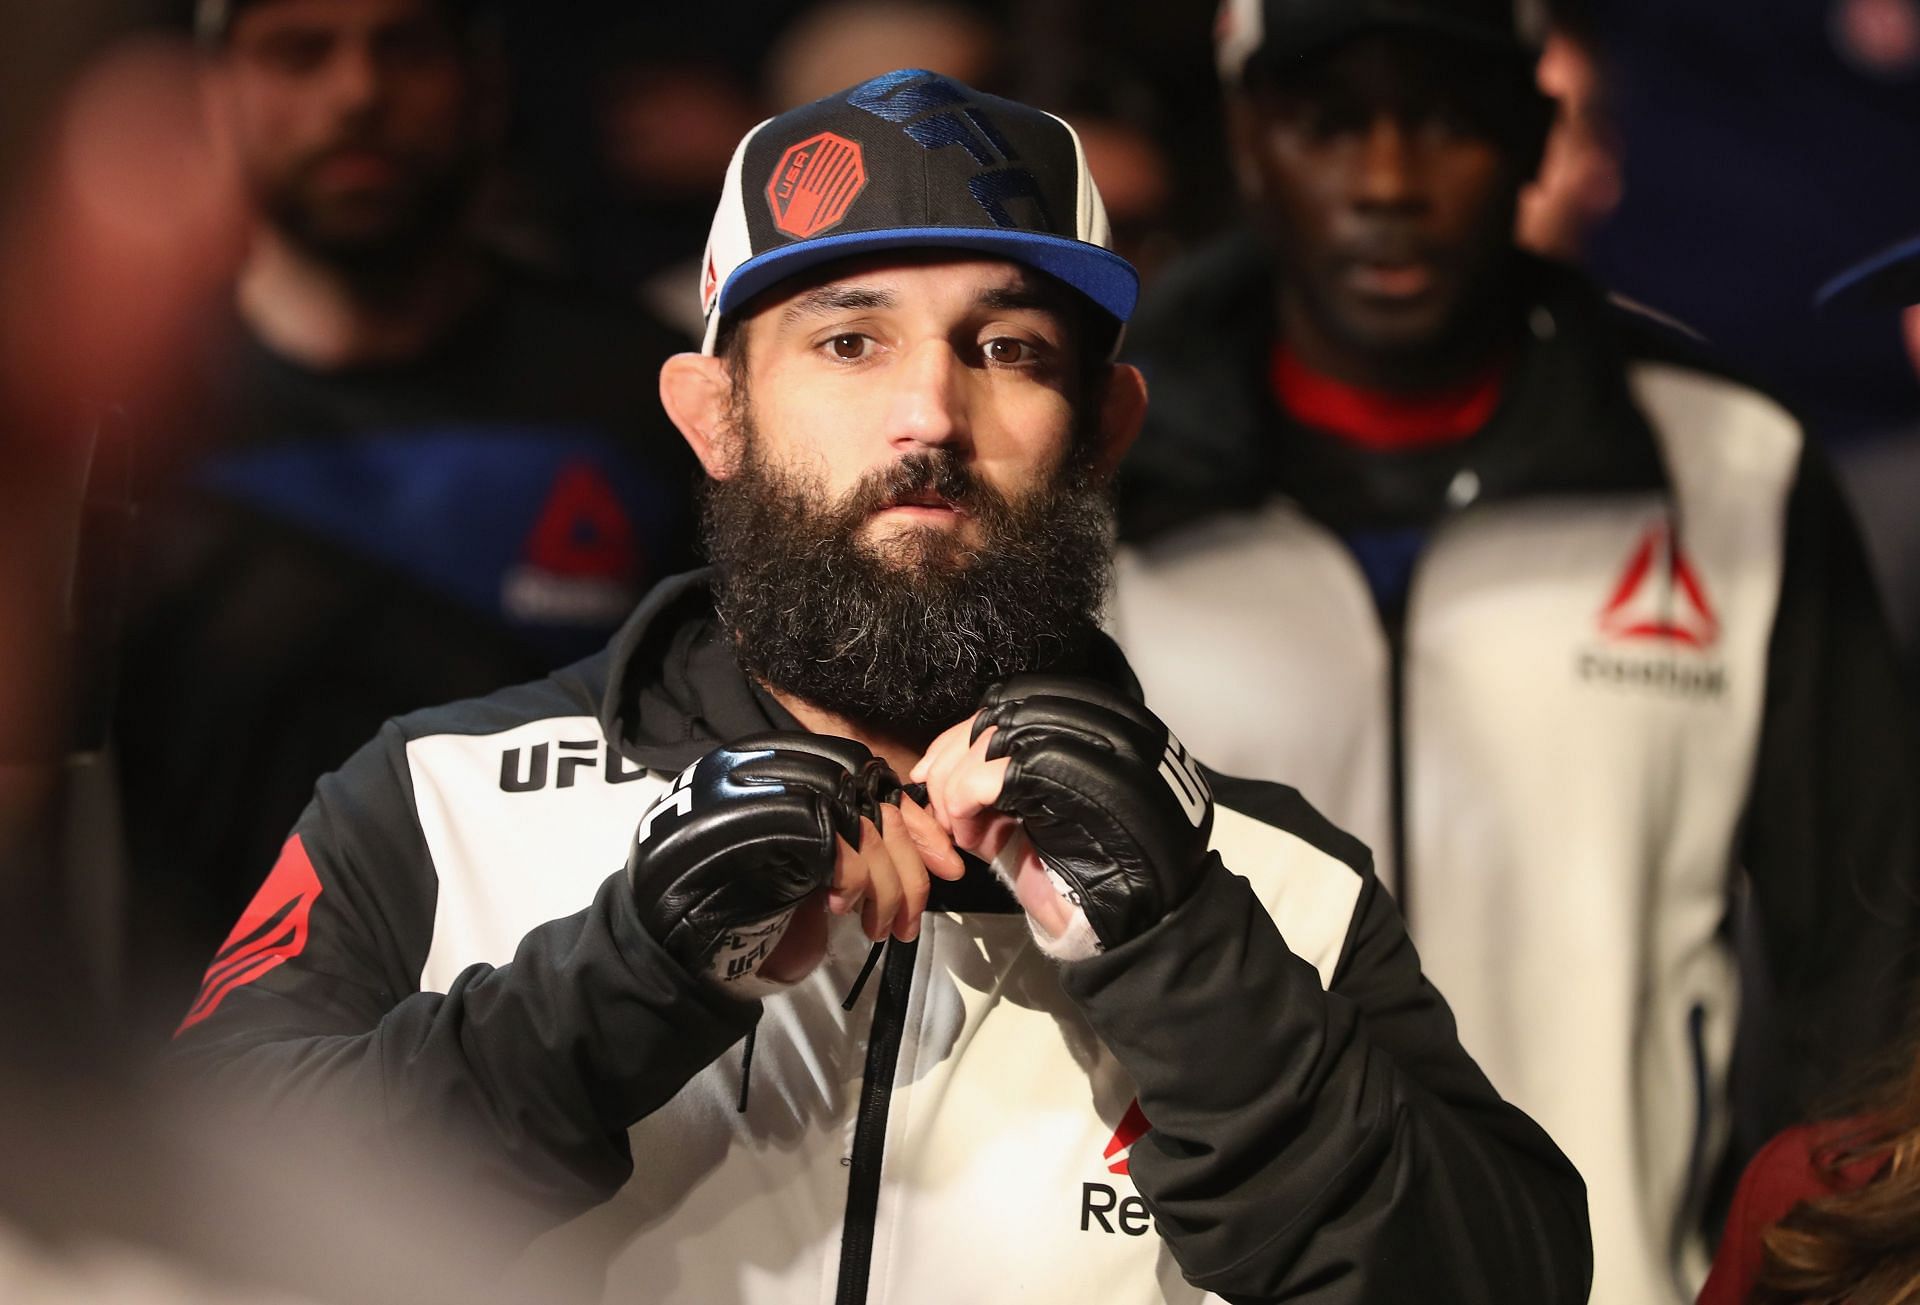 Johny Hendricks climbed to the top of the welterweight division in spectacular fashion, but fell down in the same way